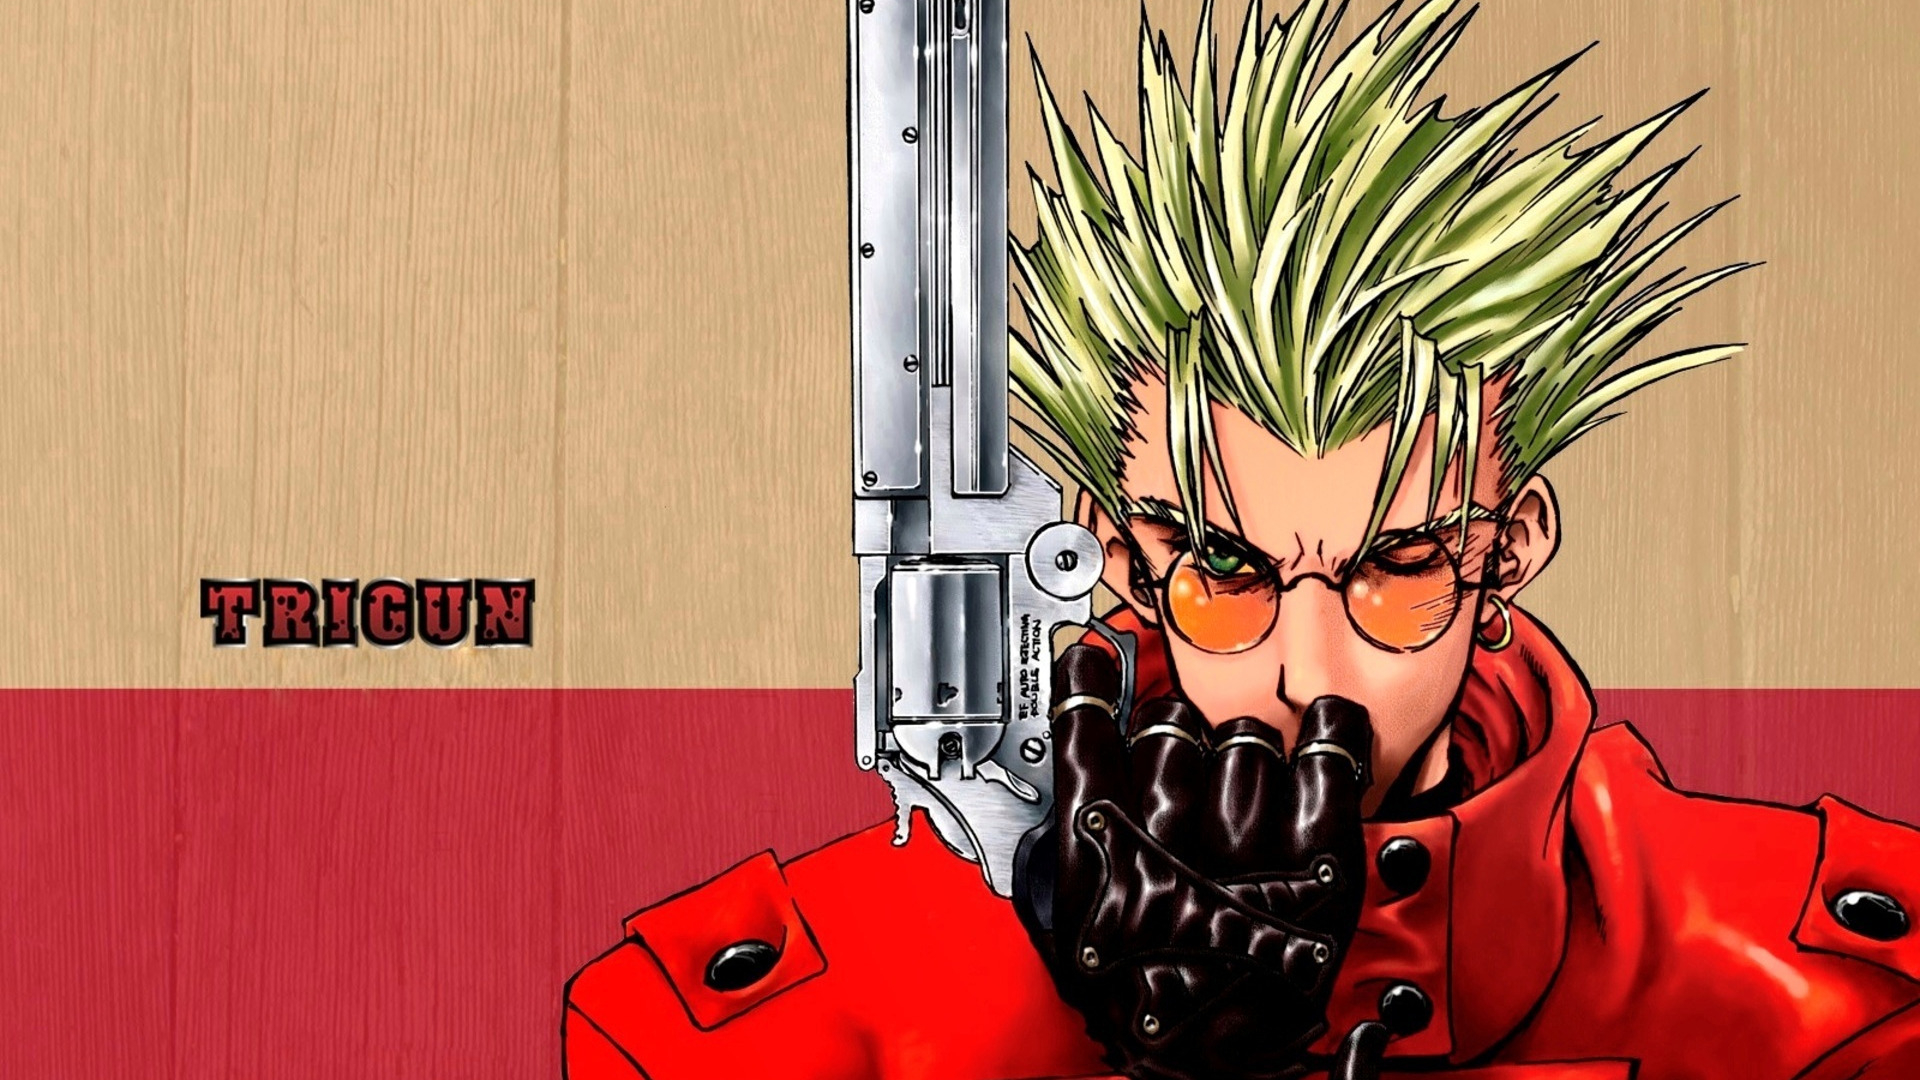 1920x1080 Download wallpaper Red, Art, Anime, Wood, Colt, Weapon, Trigun, Man, Glasses, Pose, Gloves, Letters, Leather, Character, Vash the Stampede, Madhouse, section shonen in resoluti